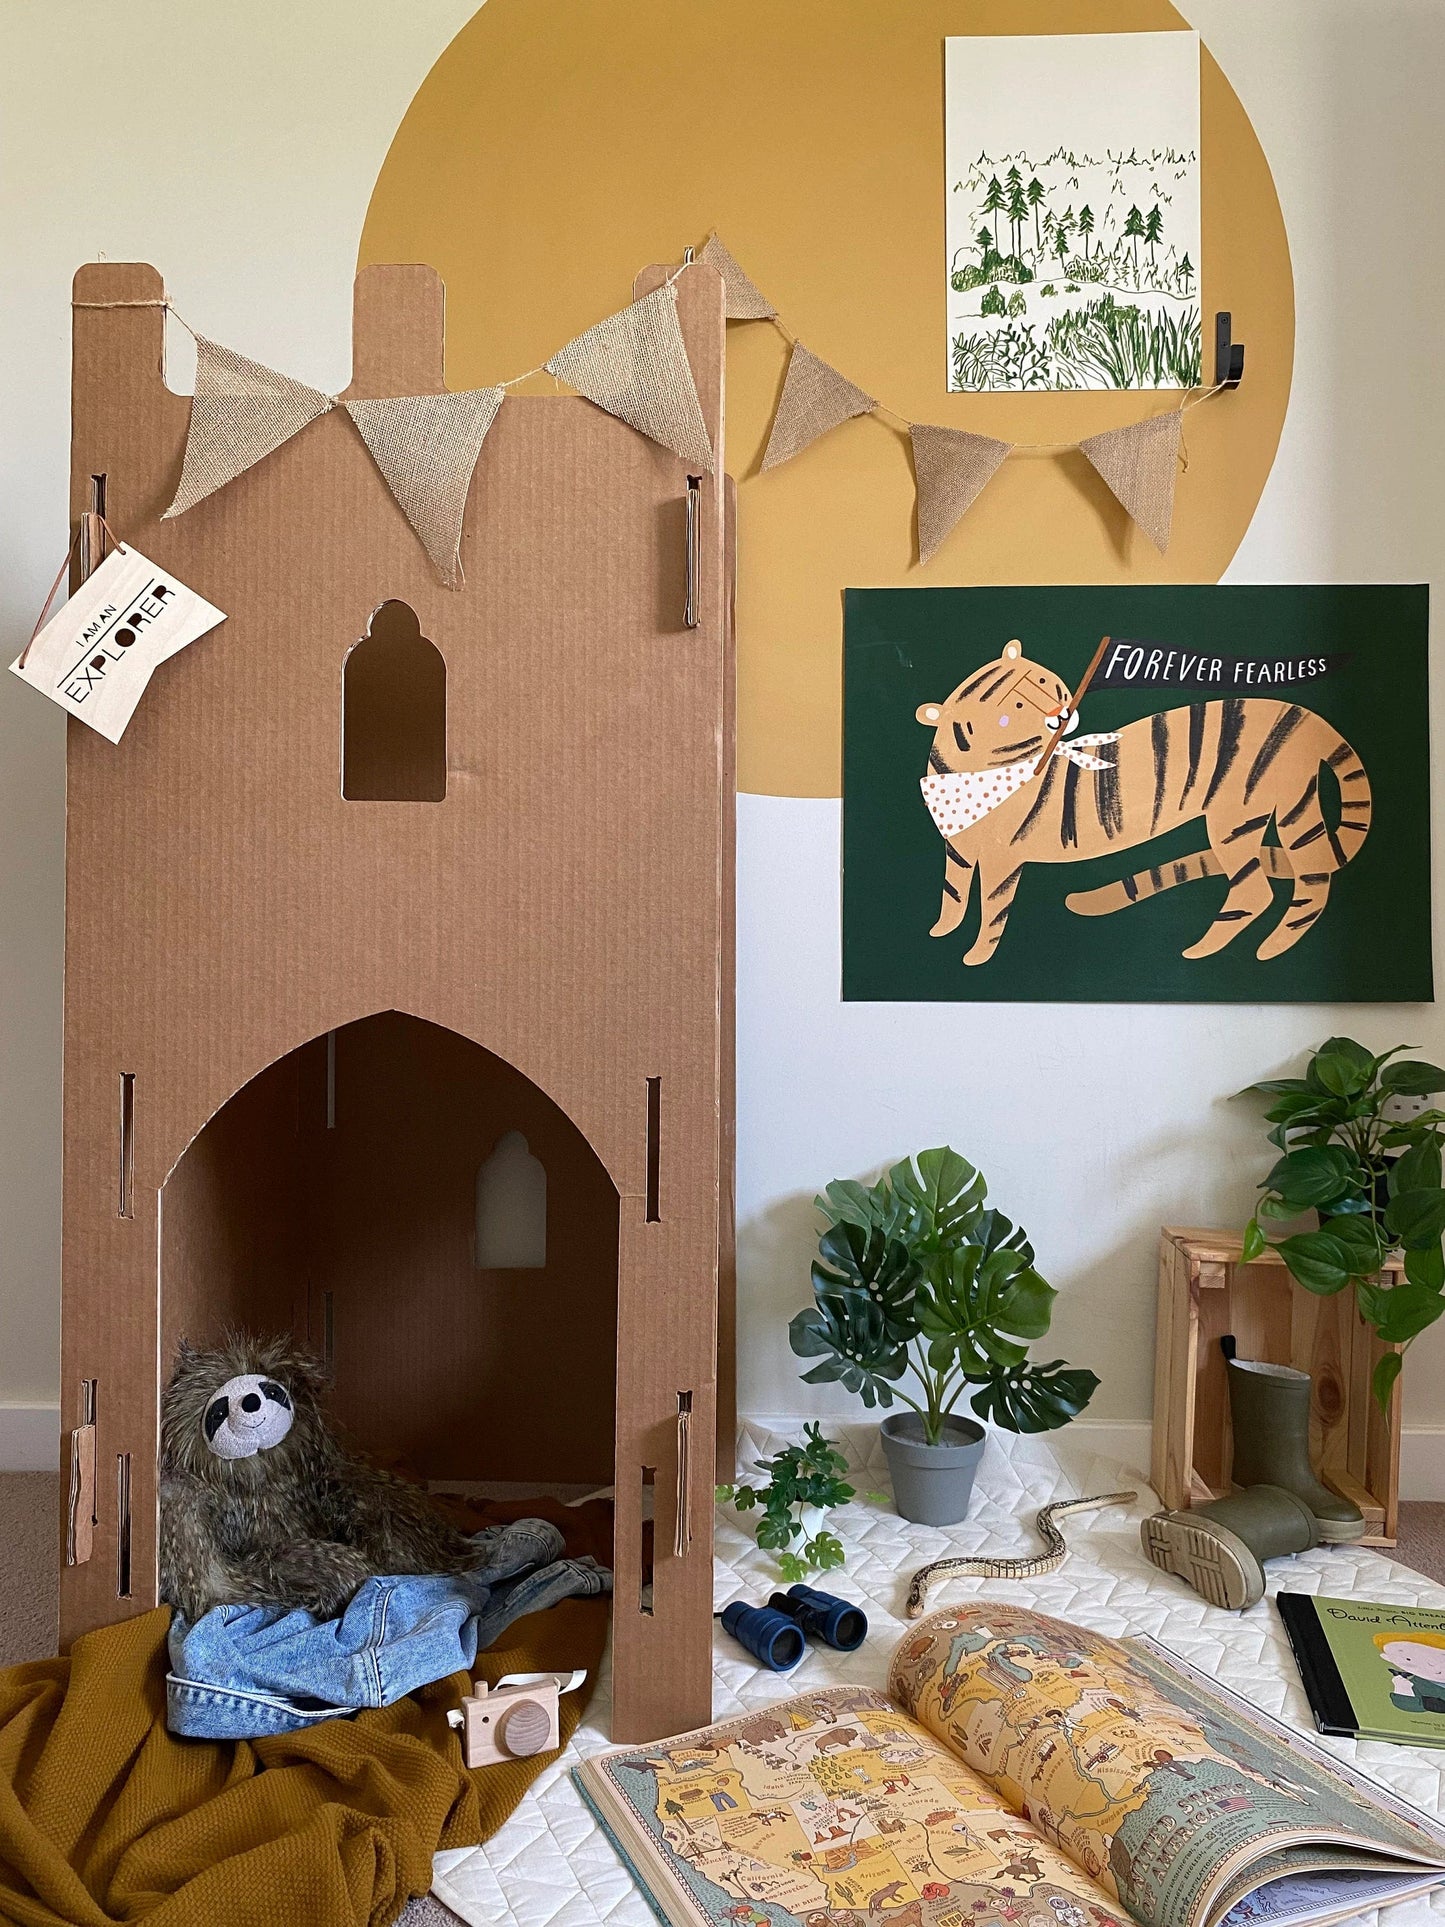 A room set up for exploration play with a Pursuit of adventure turret, a kids atlas, binoculars, plants and jute bunting with a large mustard circle painted on the wall with our woods art print and forever fearless art print in green on the wall.